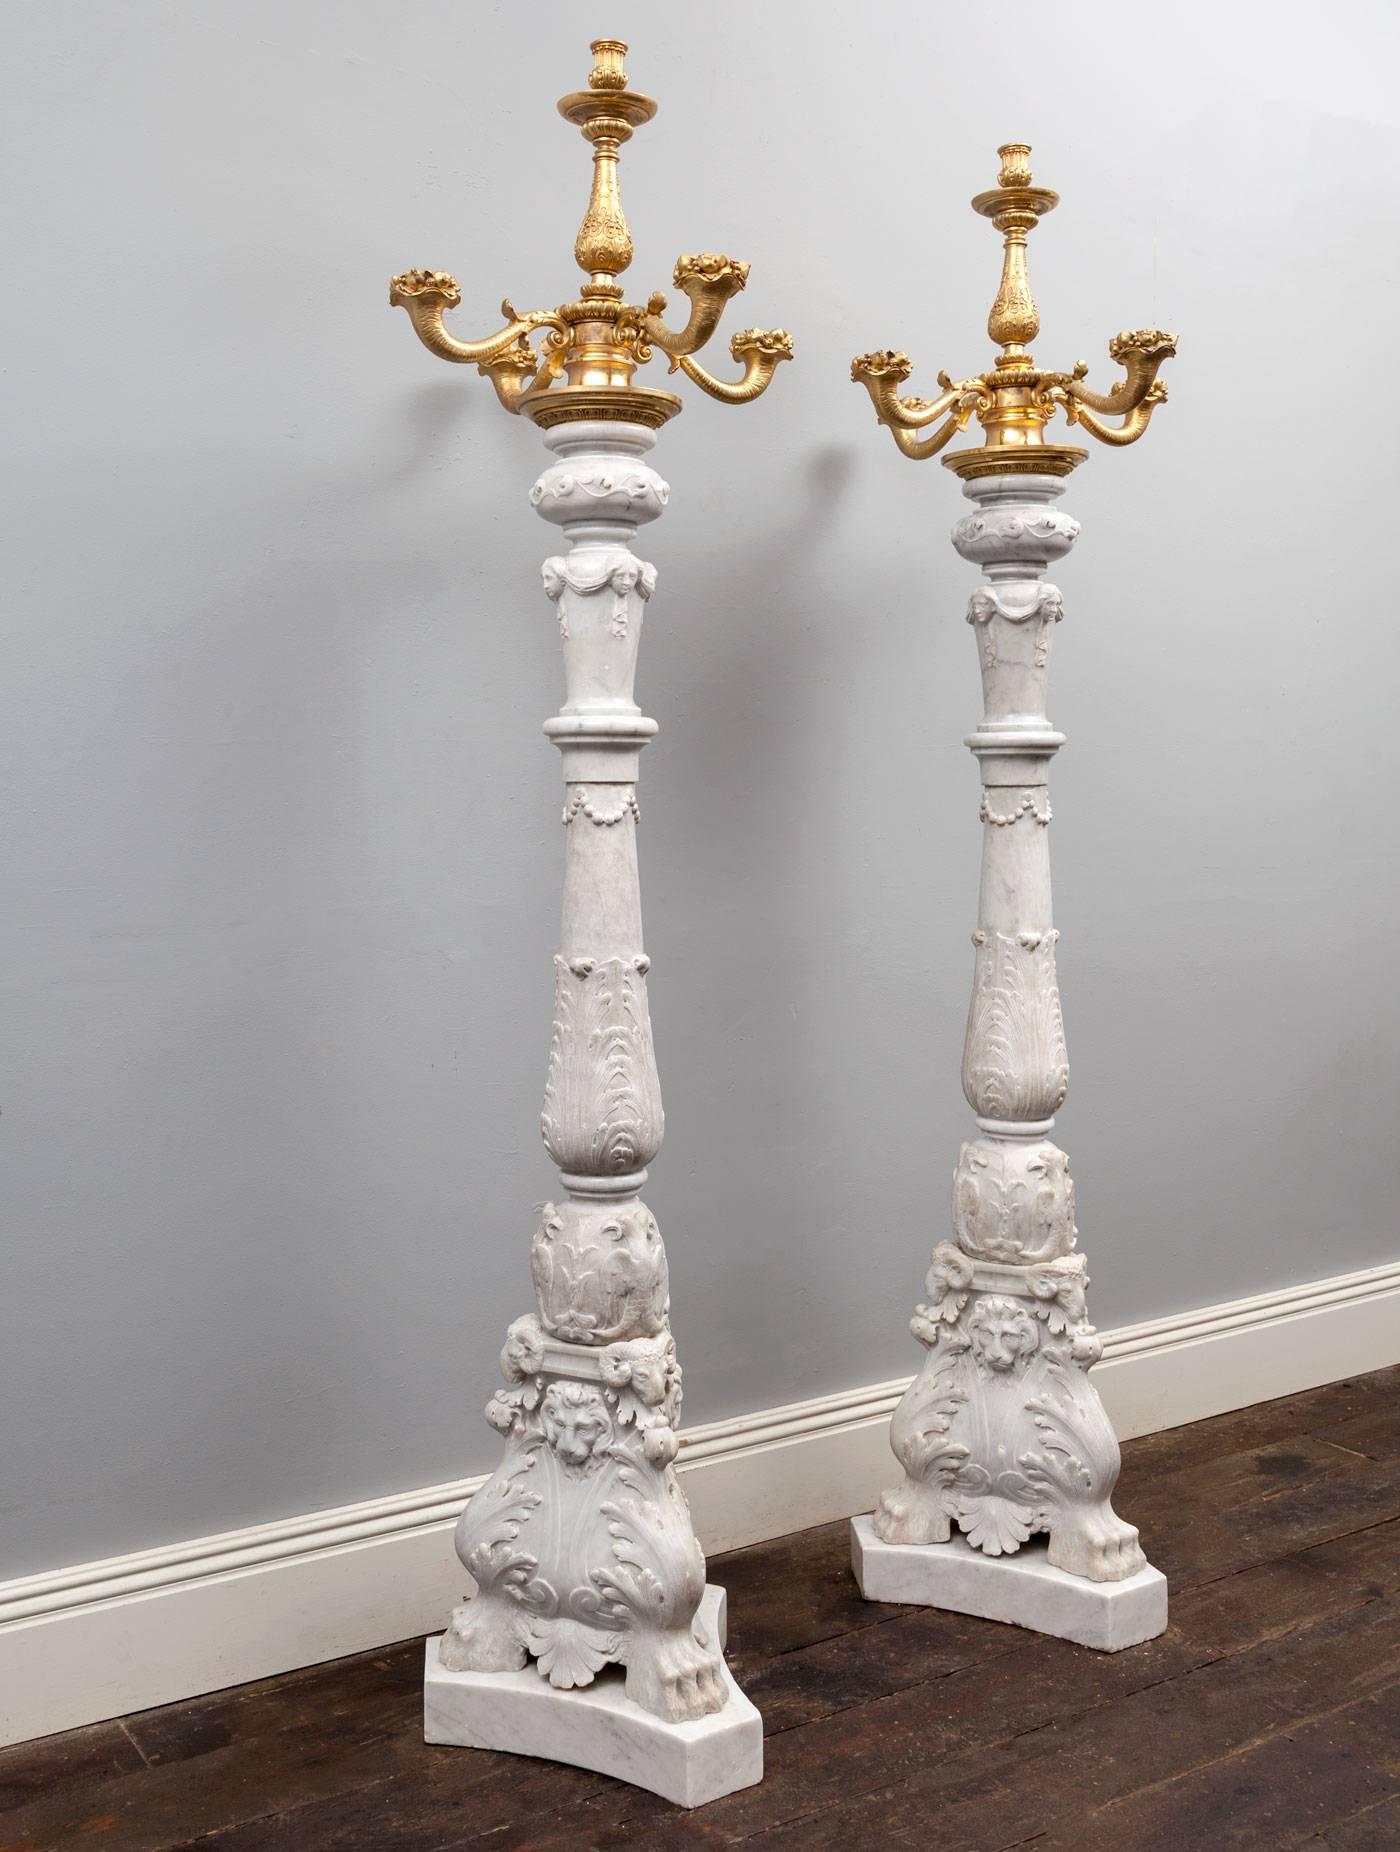 An exceptional pair of antique white Carrara marble and ormolu candelabra toucheres. Baroque in style and made during the 19th century in Venice, Italy. 

The bases with hairy paw-feet, acanthus leaves, lions masks and rams heads. The baluster